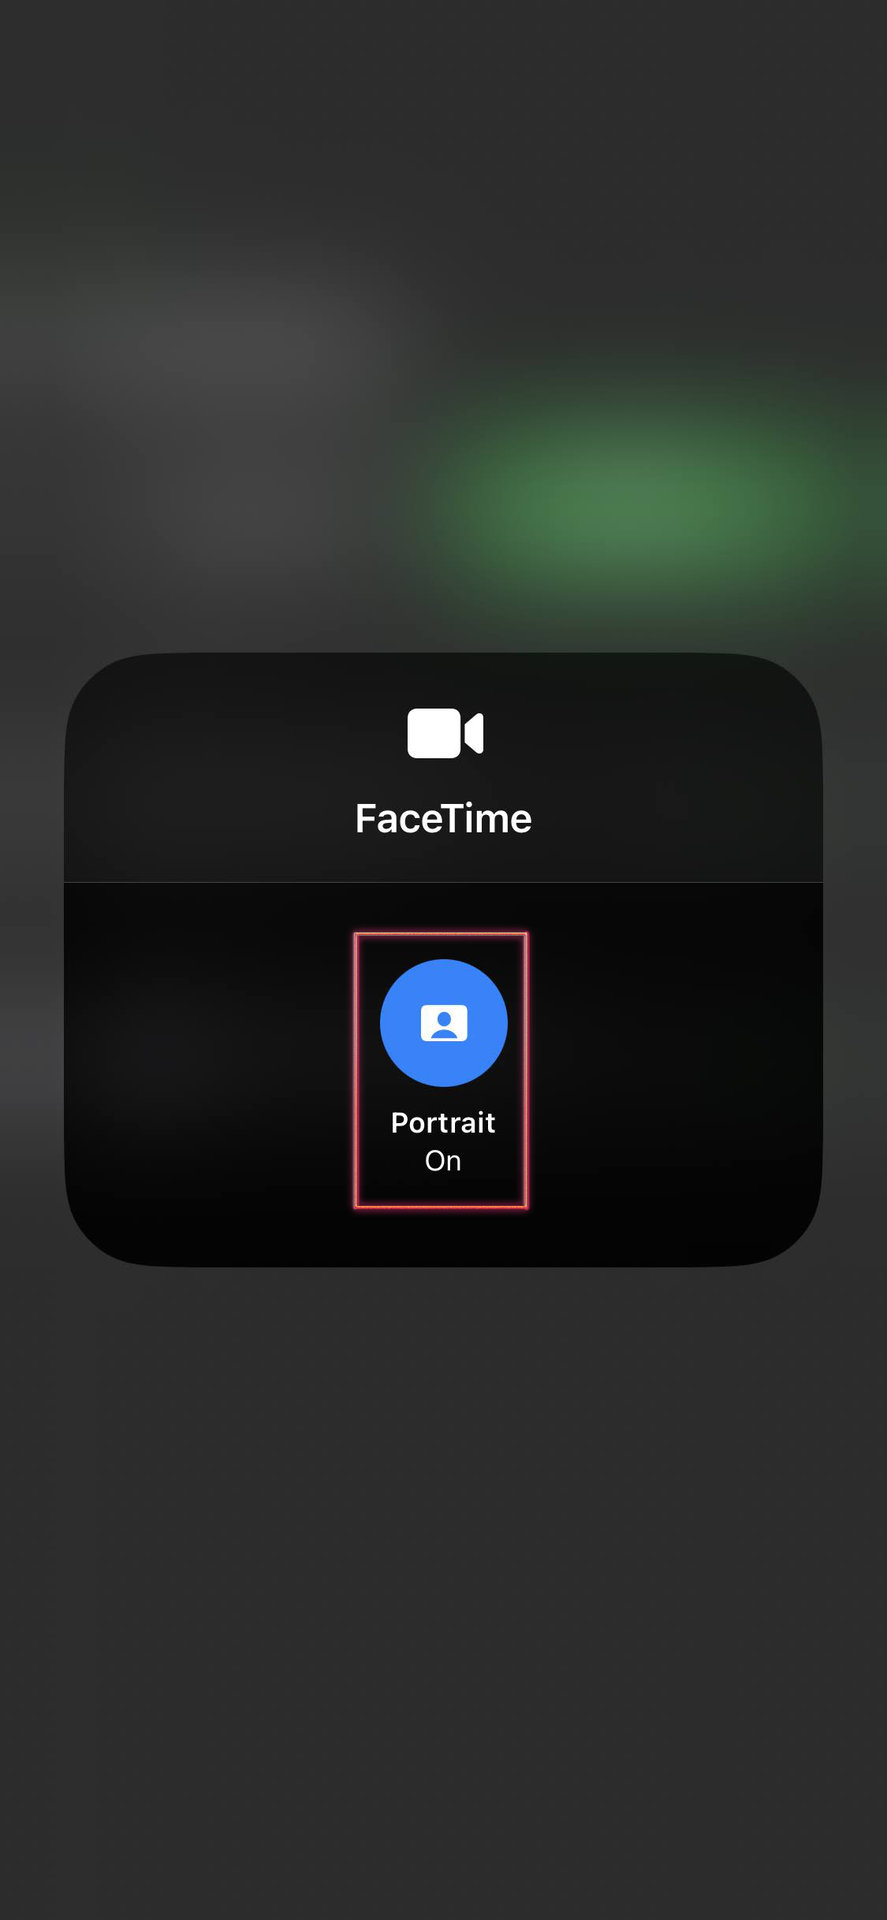 Turn on Facetime portrait mode from the Control Center 4